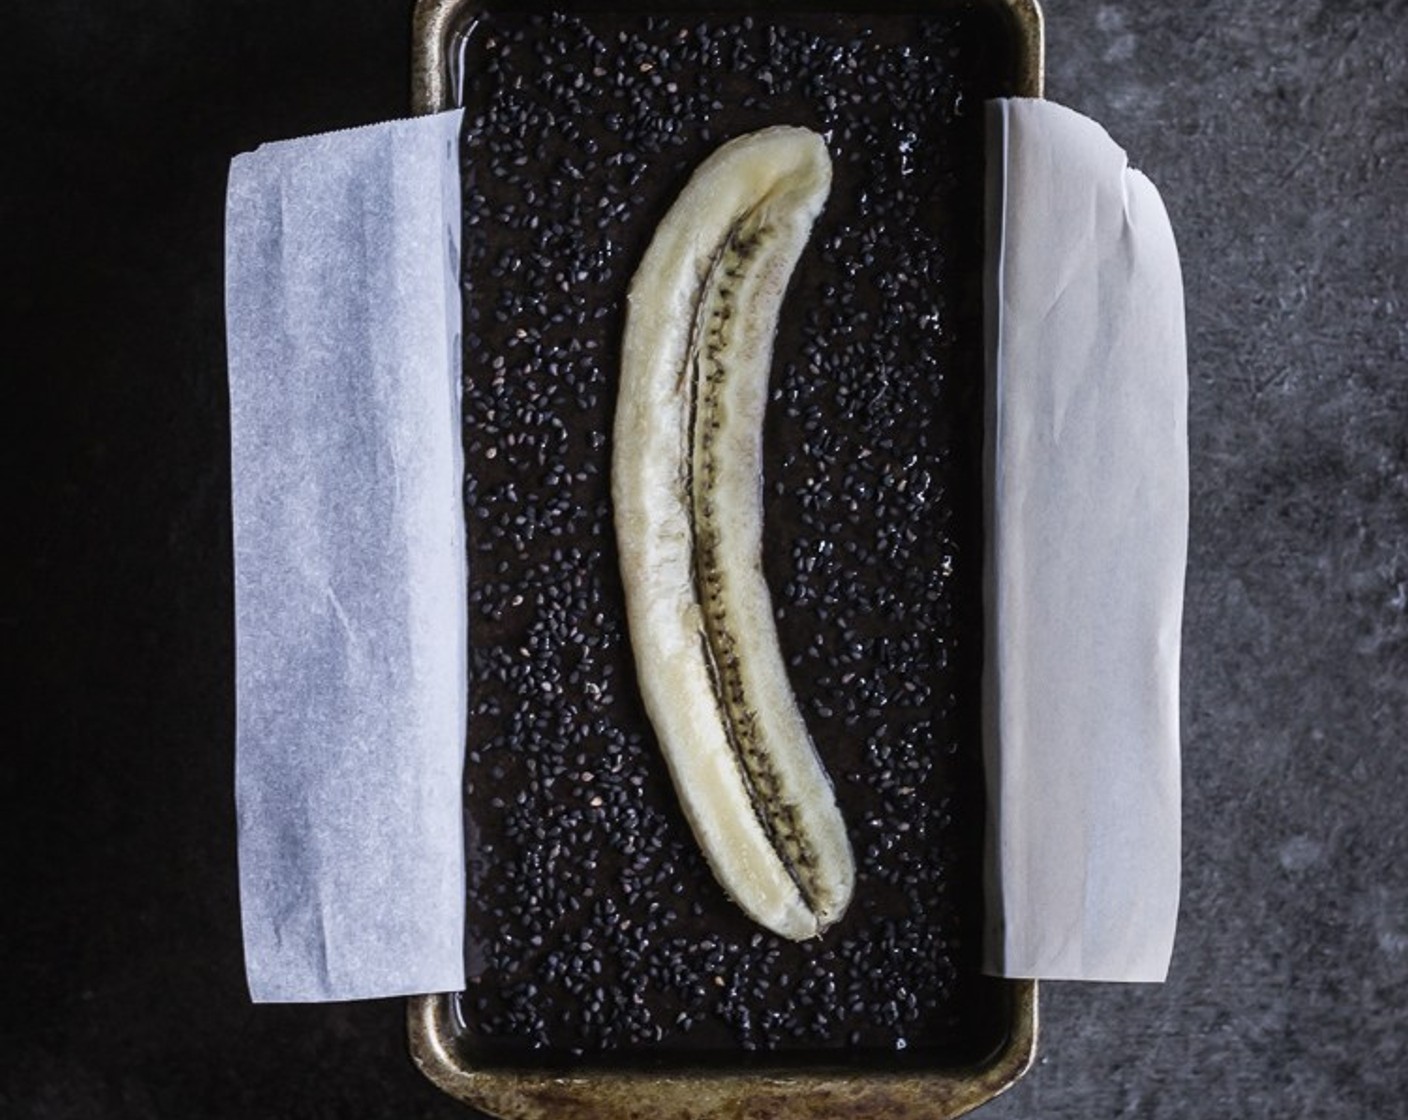 step 7 Lightly grease a 9x5-inch metal baking pan & line it with a sheet of parchment paper. Pour the batter into the baking pan, top with remaining Toasted Black Sesame Seeds (1 tsp), the sliced banana and then sprinkle the remaining sugar.